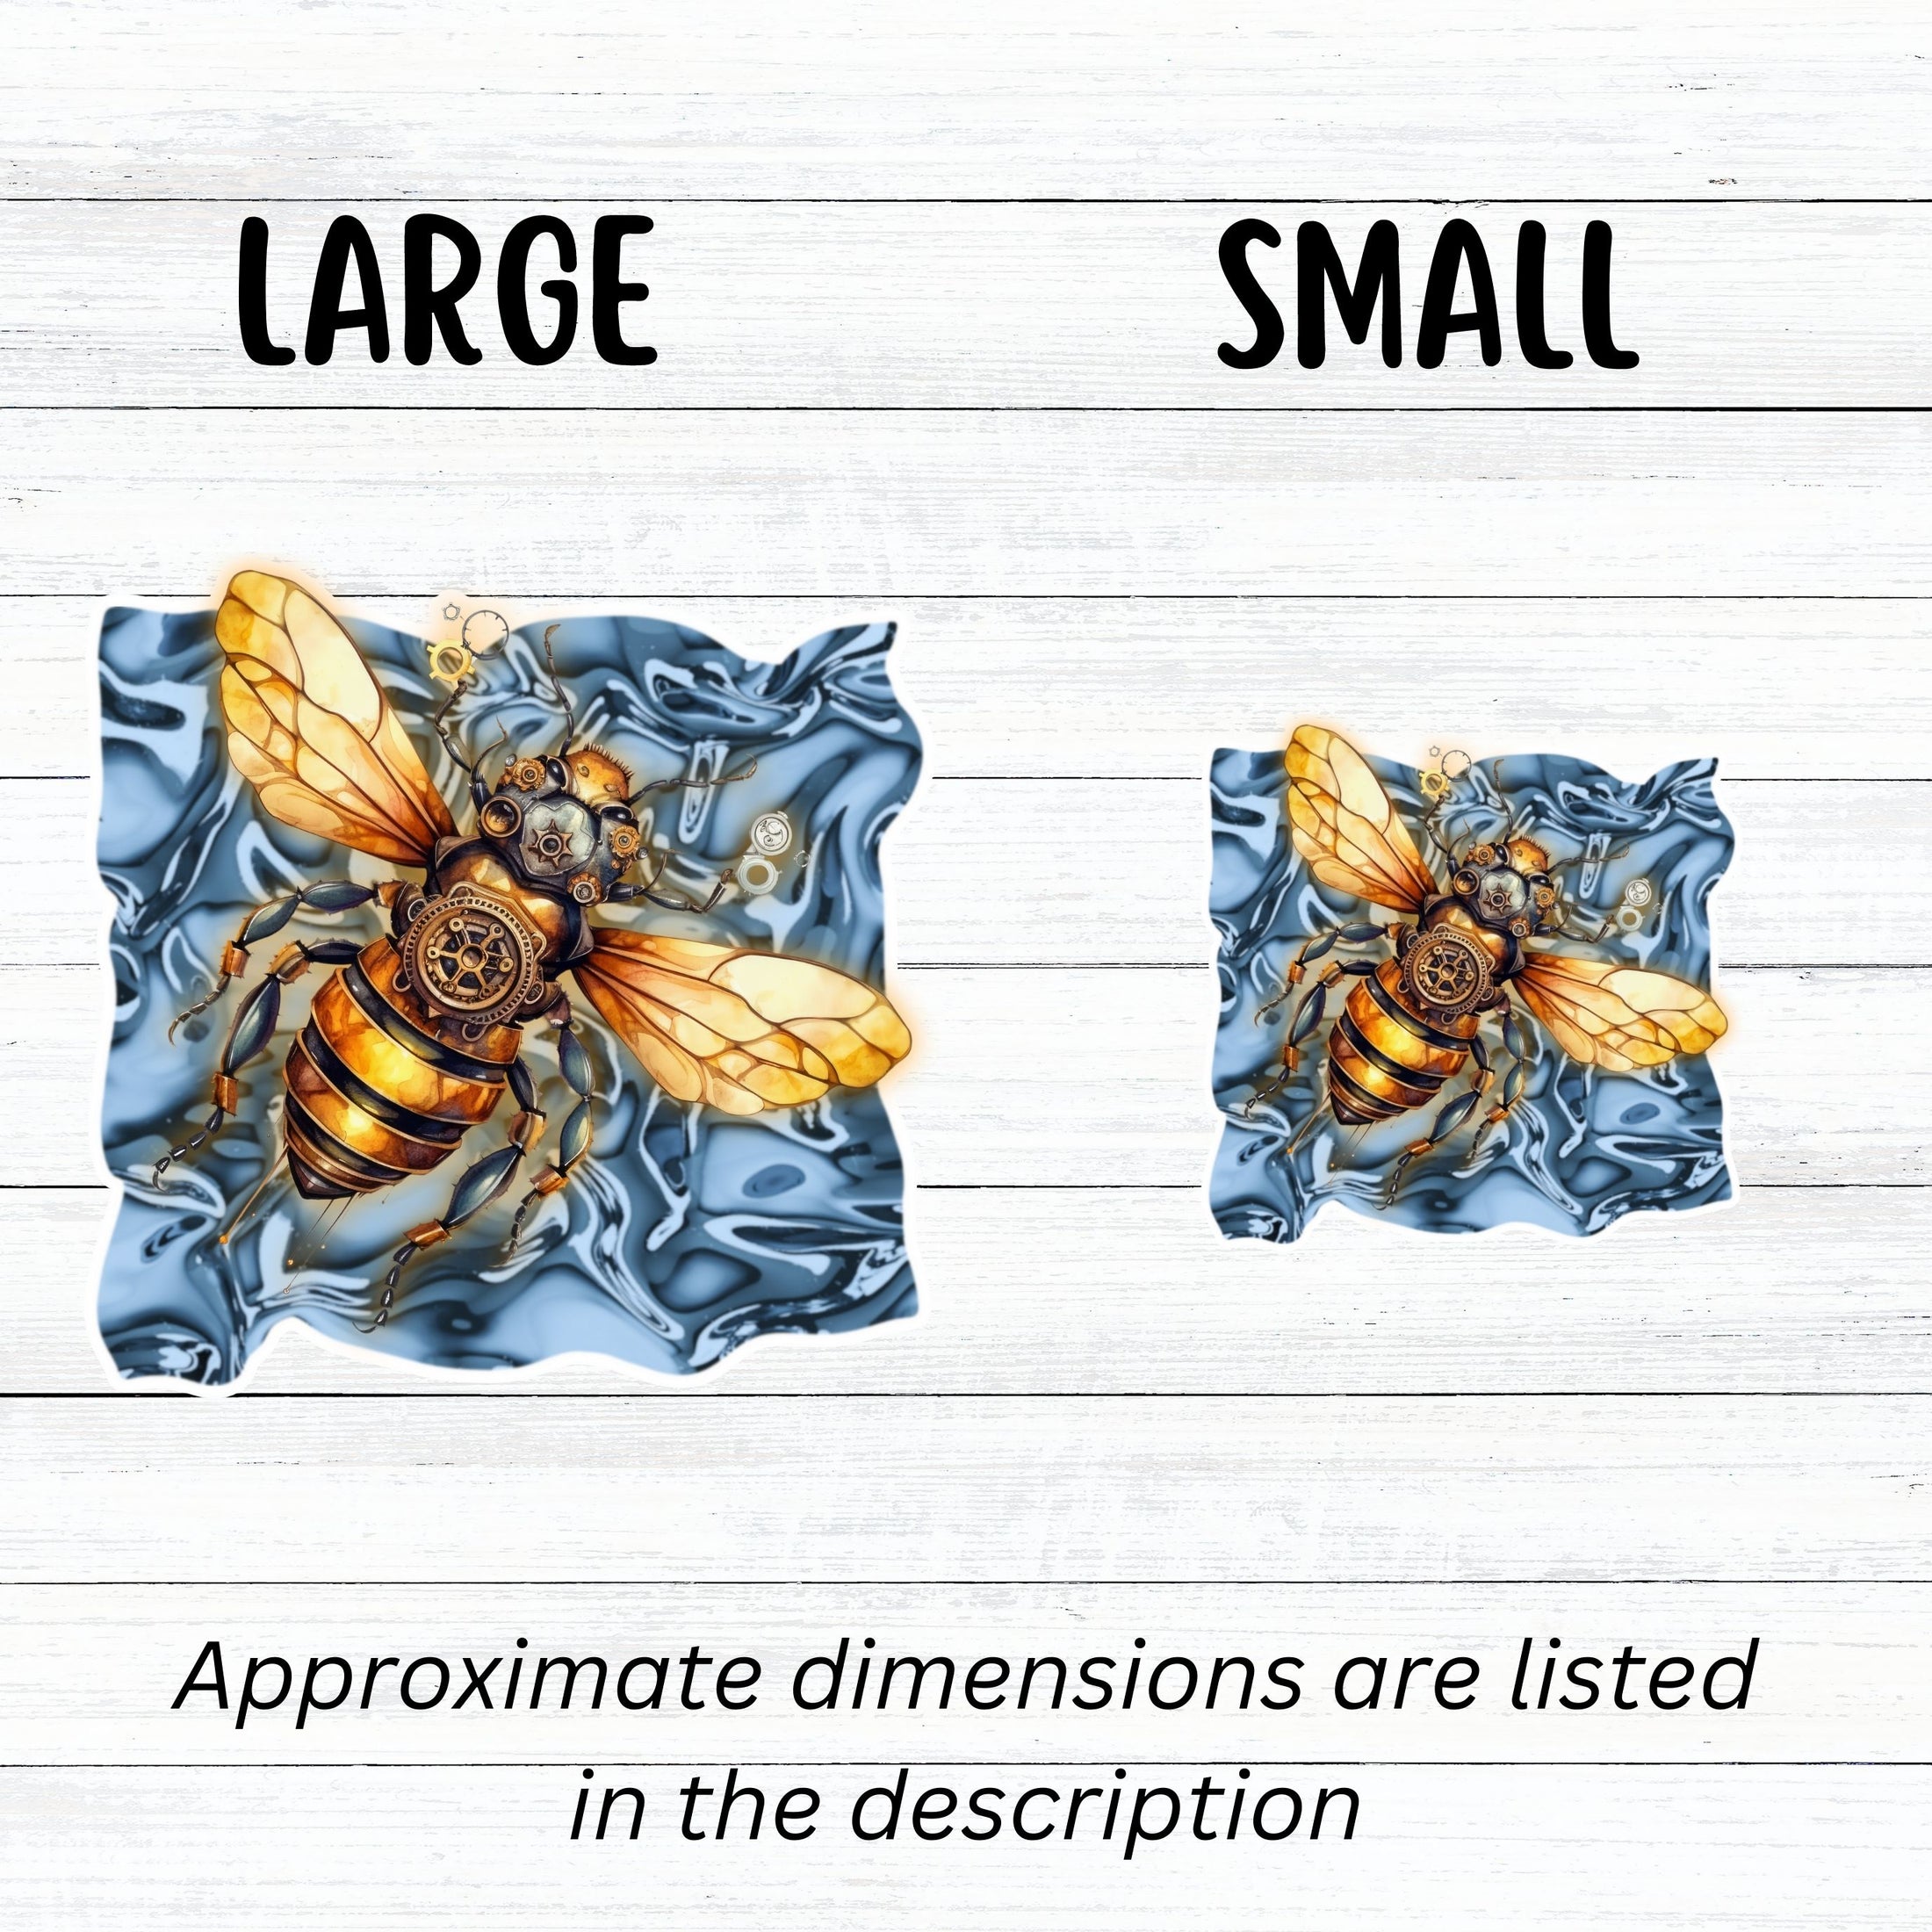 This image shows large and small steampunk bee stickers next to each other.